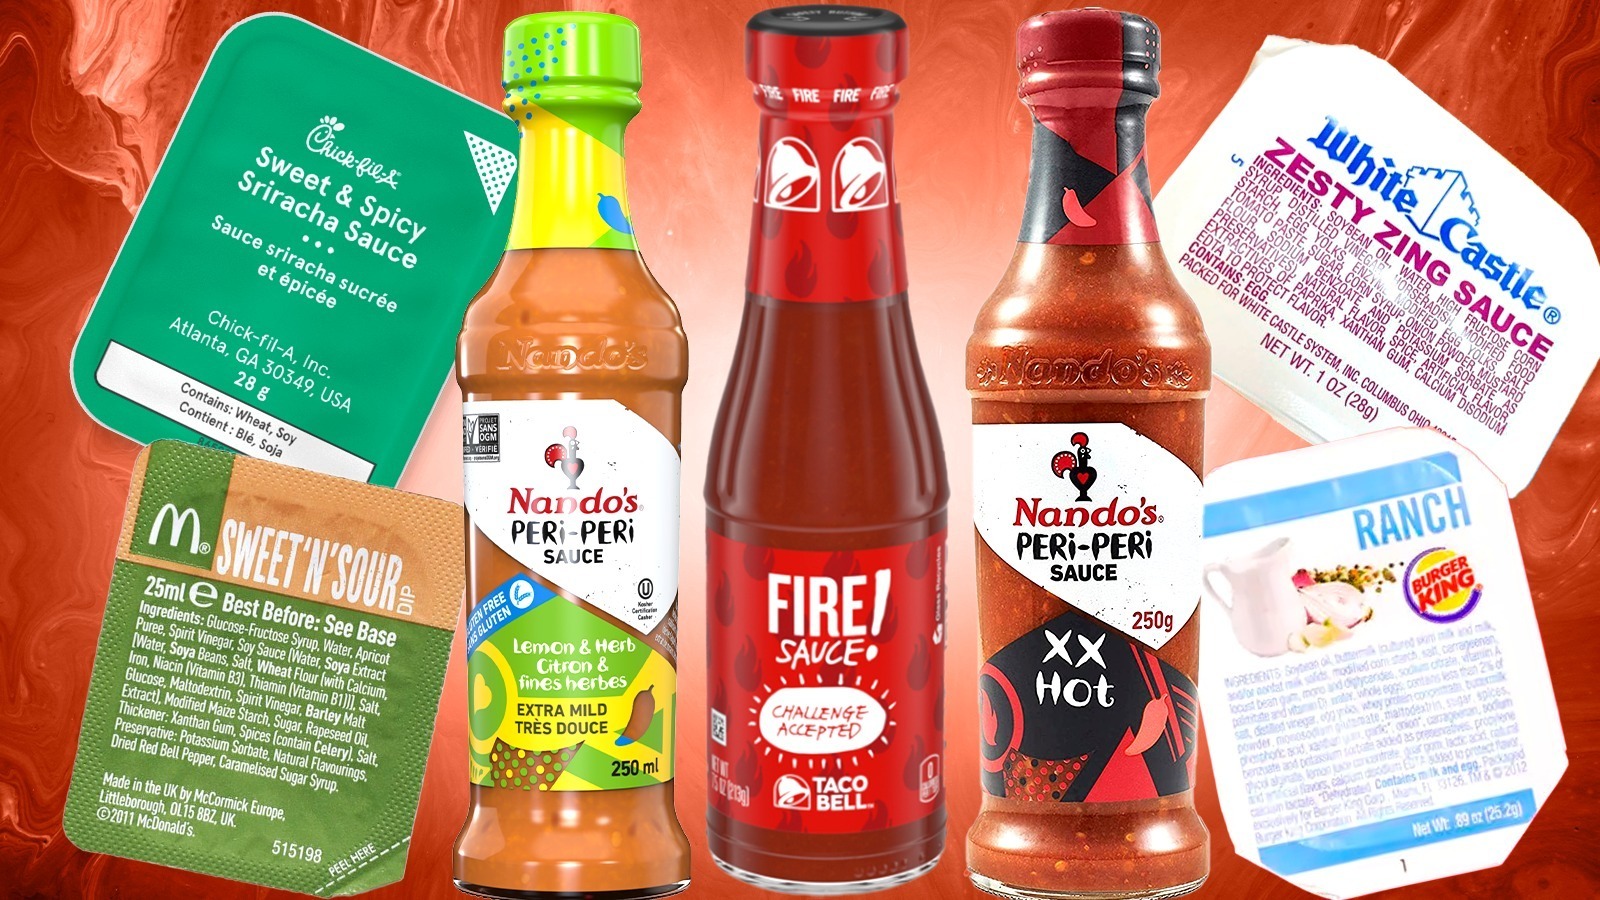 Have You Tried Hidden Valley's Secret Sauces Yet? They're A Game Changer